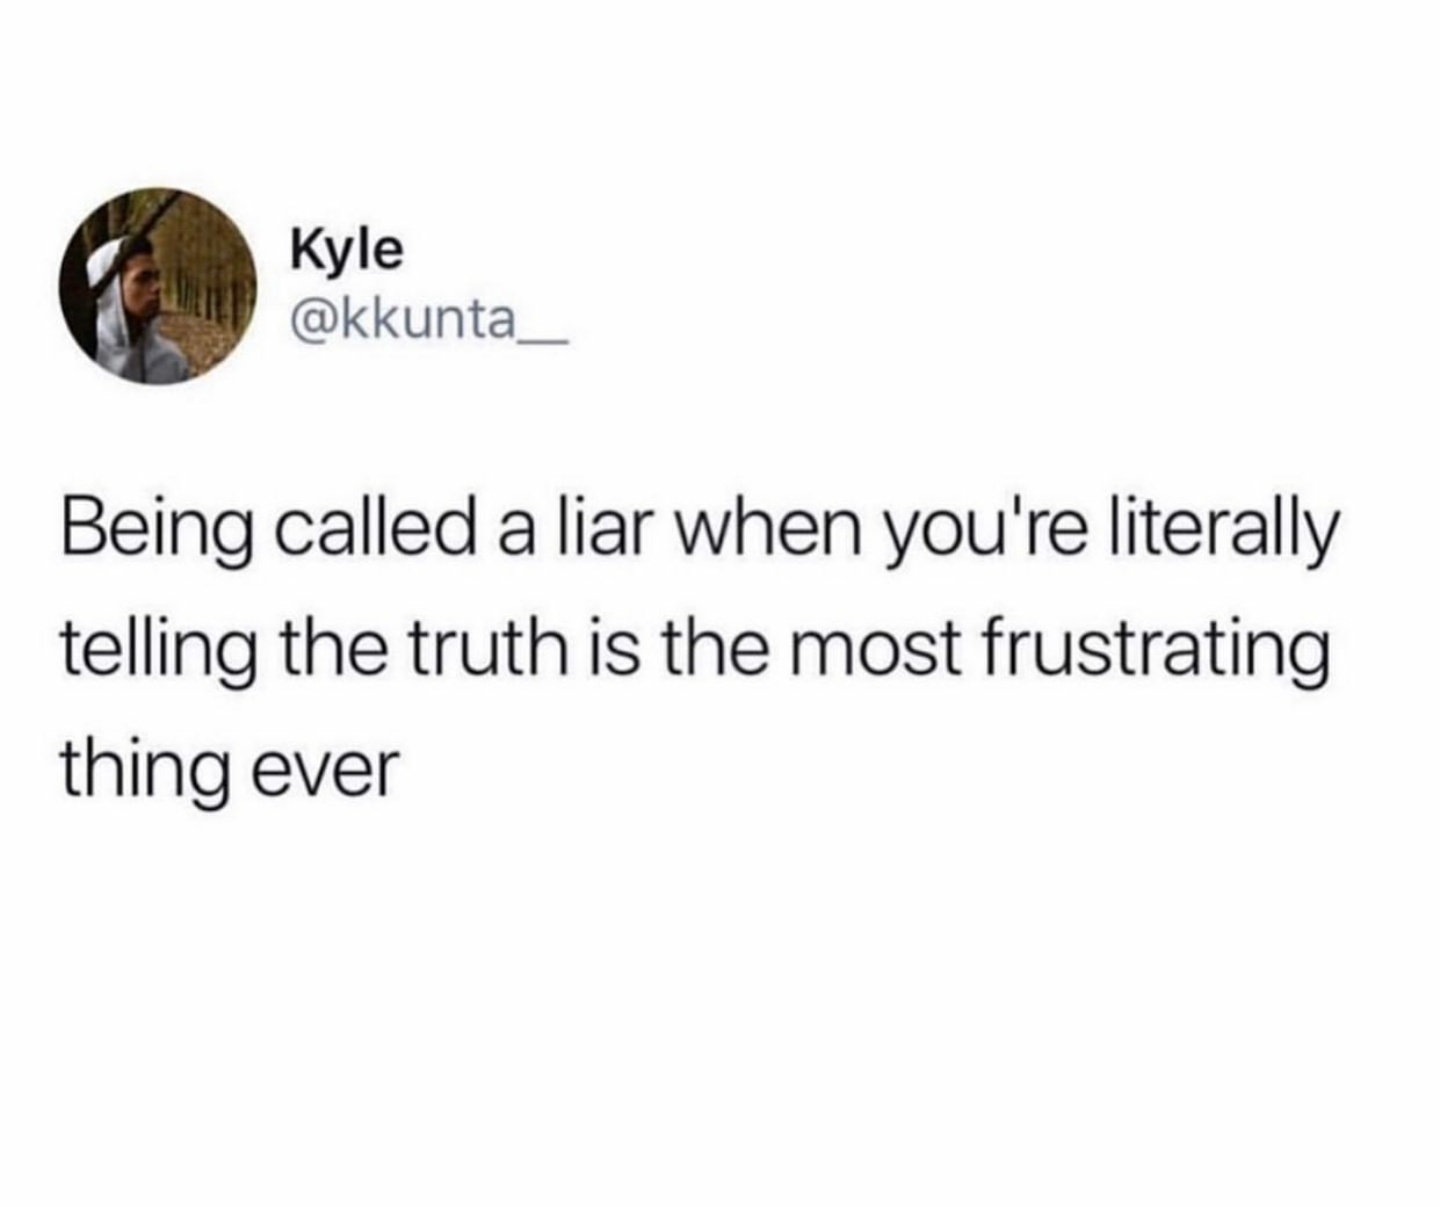 sex is great but have you ever been a priority - Kyle Being called a liar when you're literally telling the truth is the most frustrating thing ever